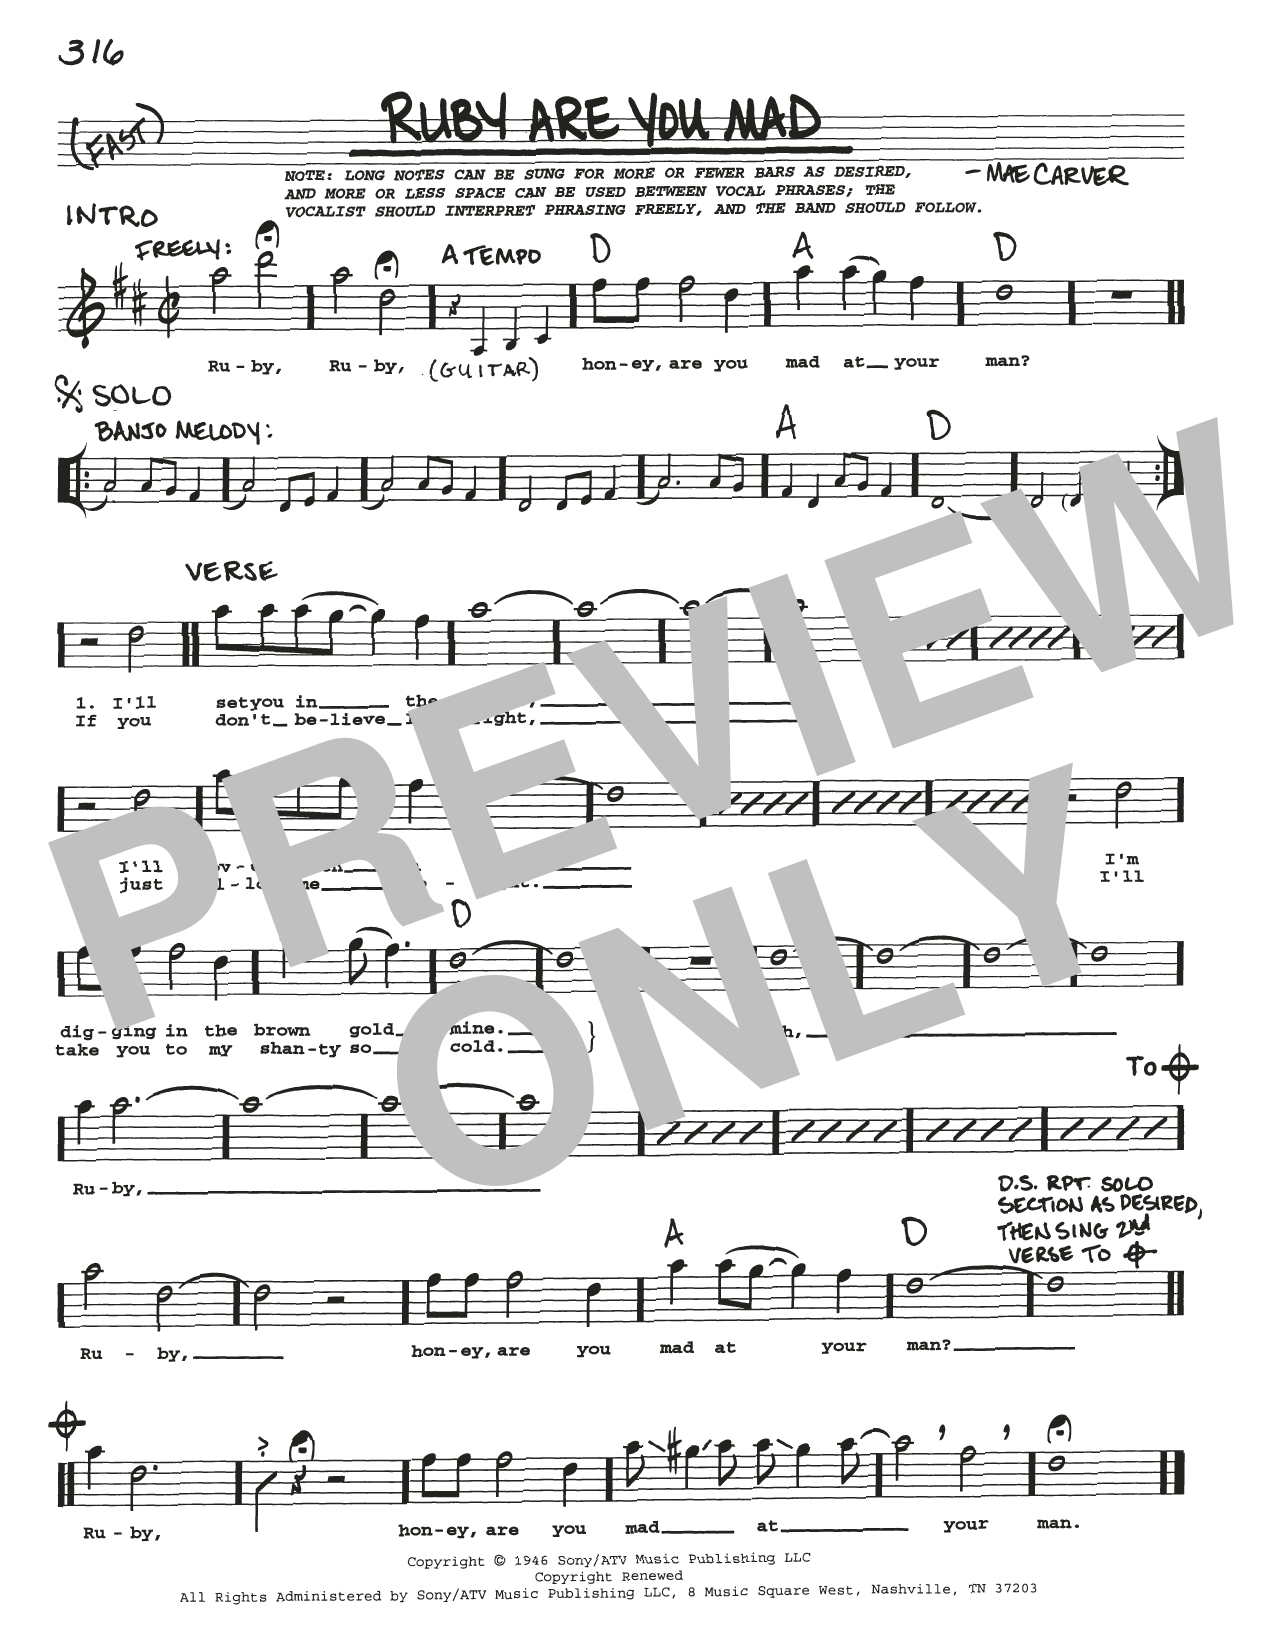 Download Mae Carver Ruby Are You Mad Sheet Music